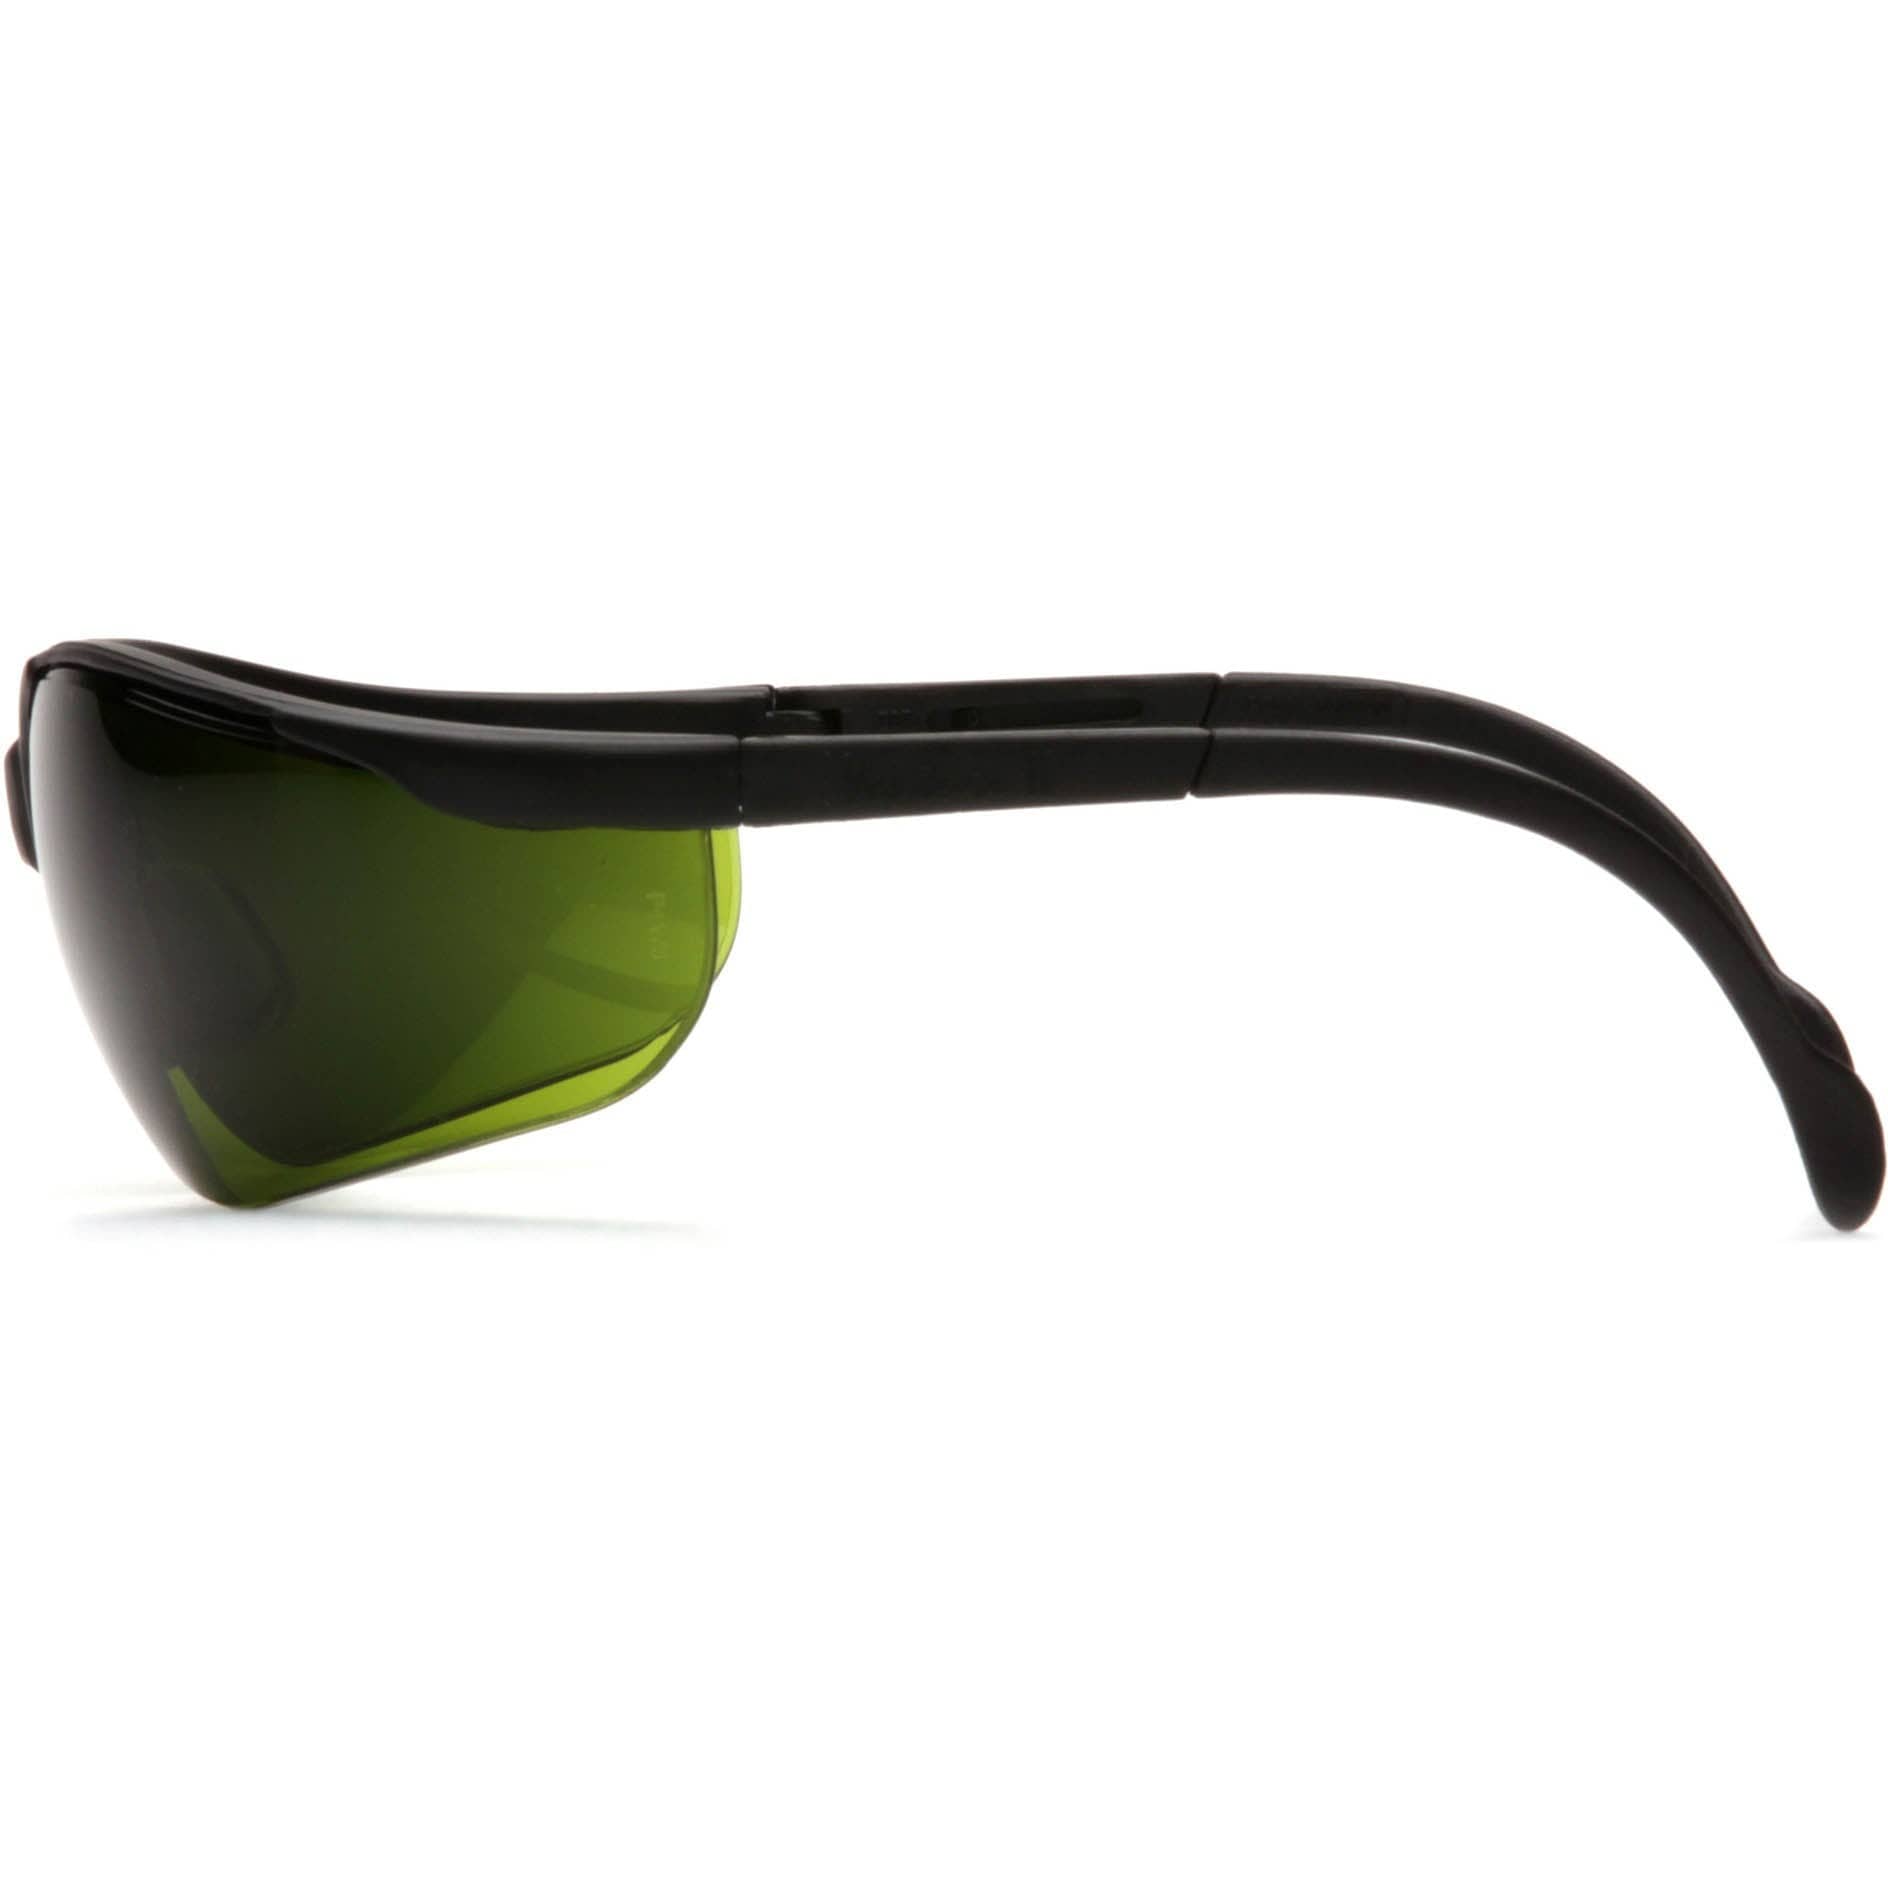 Pyramex Venture 2 Safety Glasses with Black Frame and Shade 3.0 Lens Side View